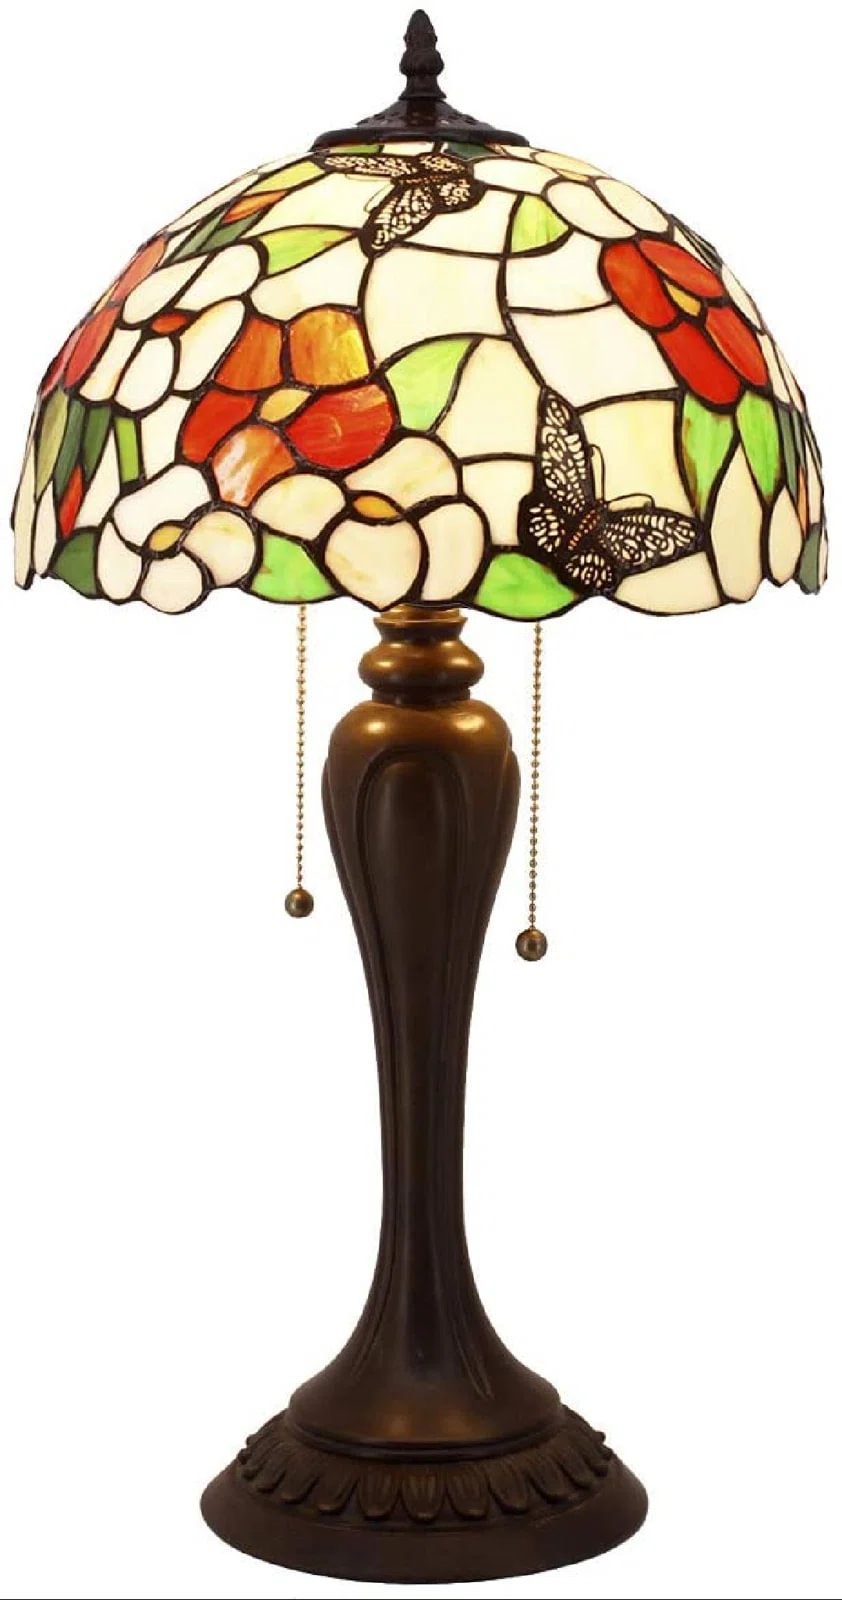 Tiffany Lamp Bedside Pink Stained Glass Butterfly Lampshade Antique Style Table Reading Desk Light 22" Tall Lover Friend Parent Living Room Bedroom Office Study Coffee Bar Led Bulb Better